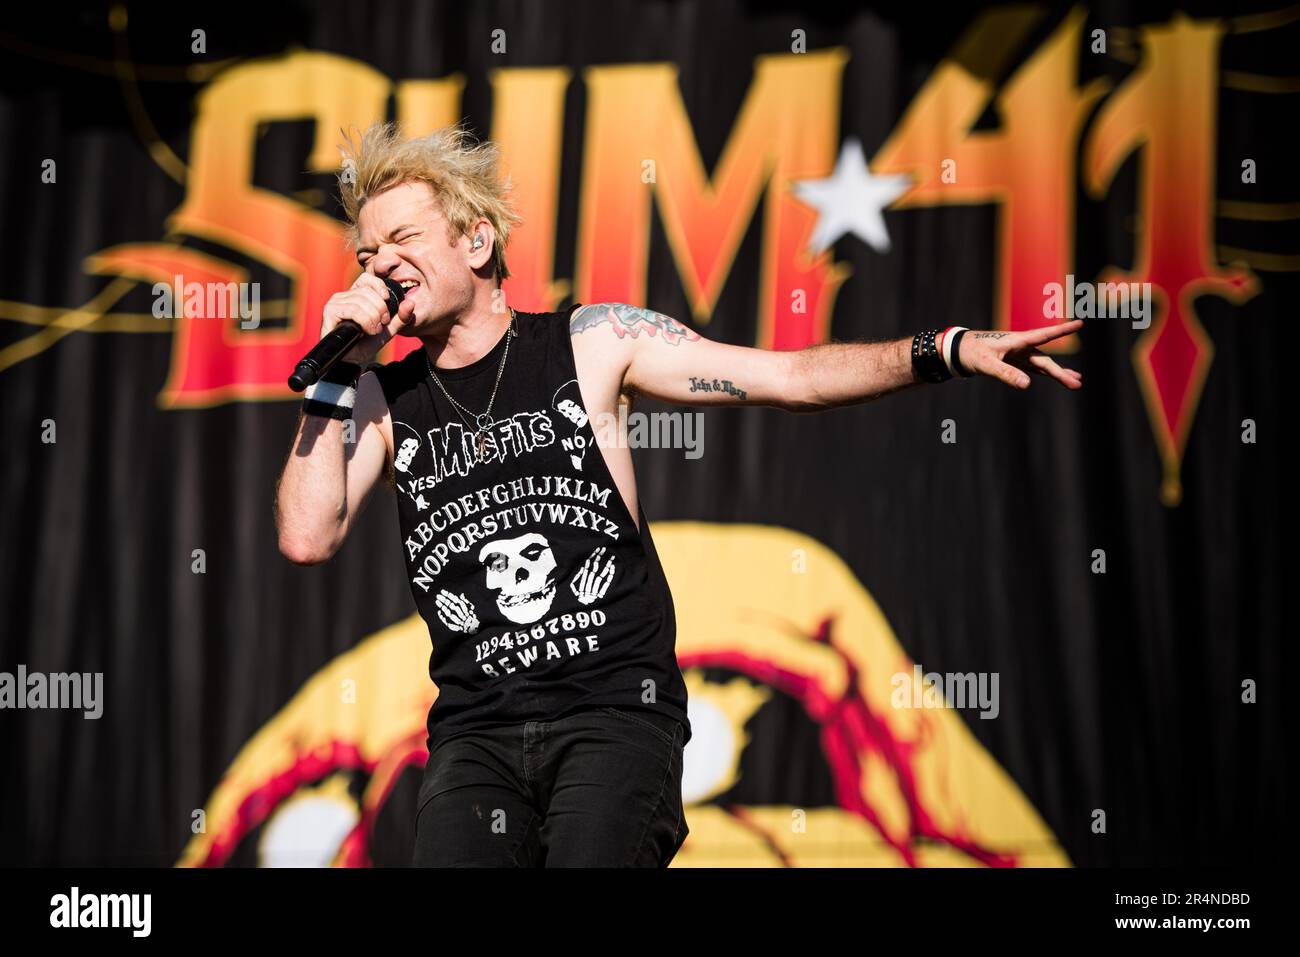 FLORENCE, ITALY, FIRENZE ROCKS FESTIVAL: Deryck Whibley, singer and founder of the Canadian punk rock band SUM41, performing live on stage at the Firenze Rocks festival Stock Photo